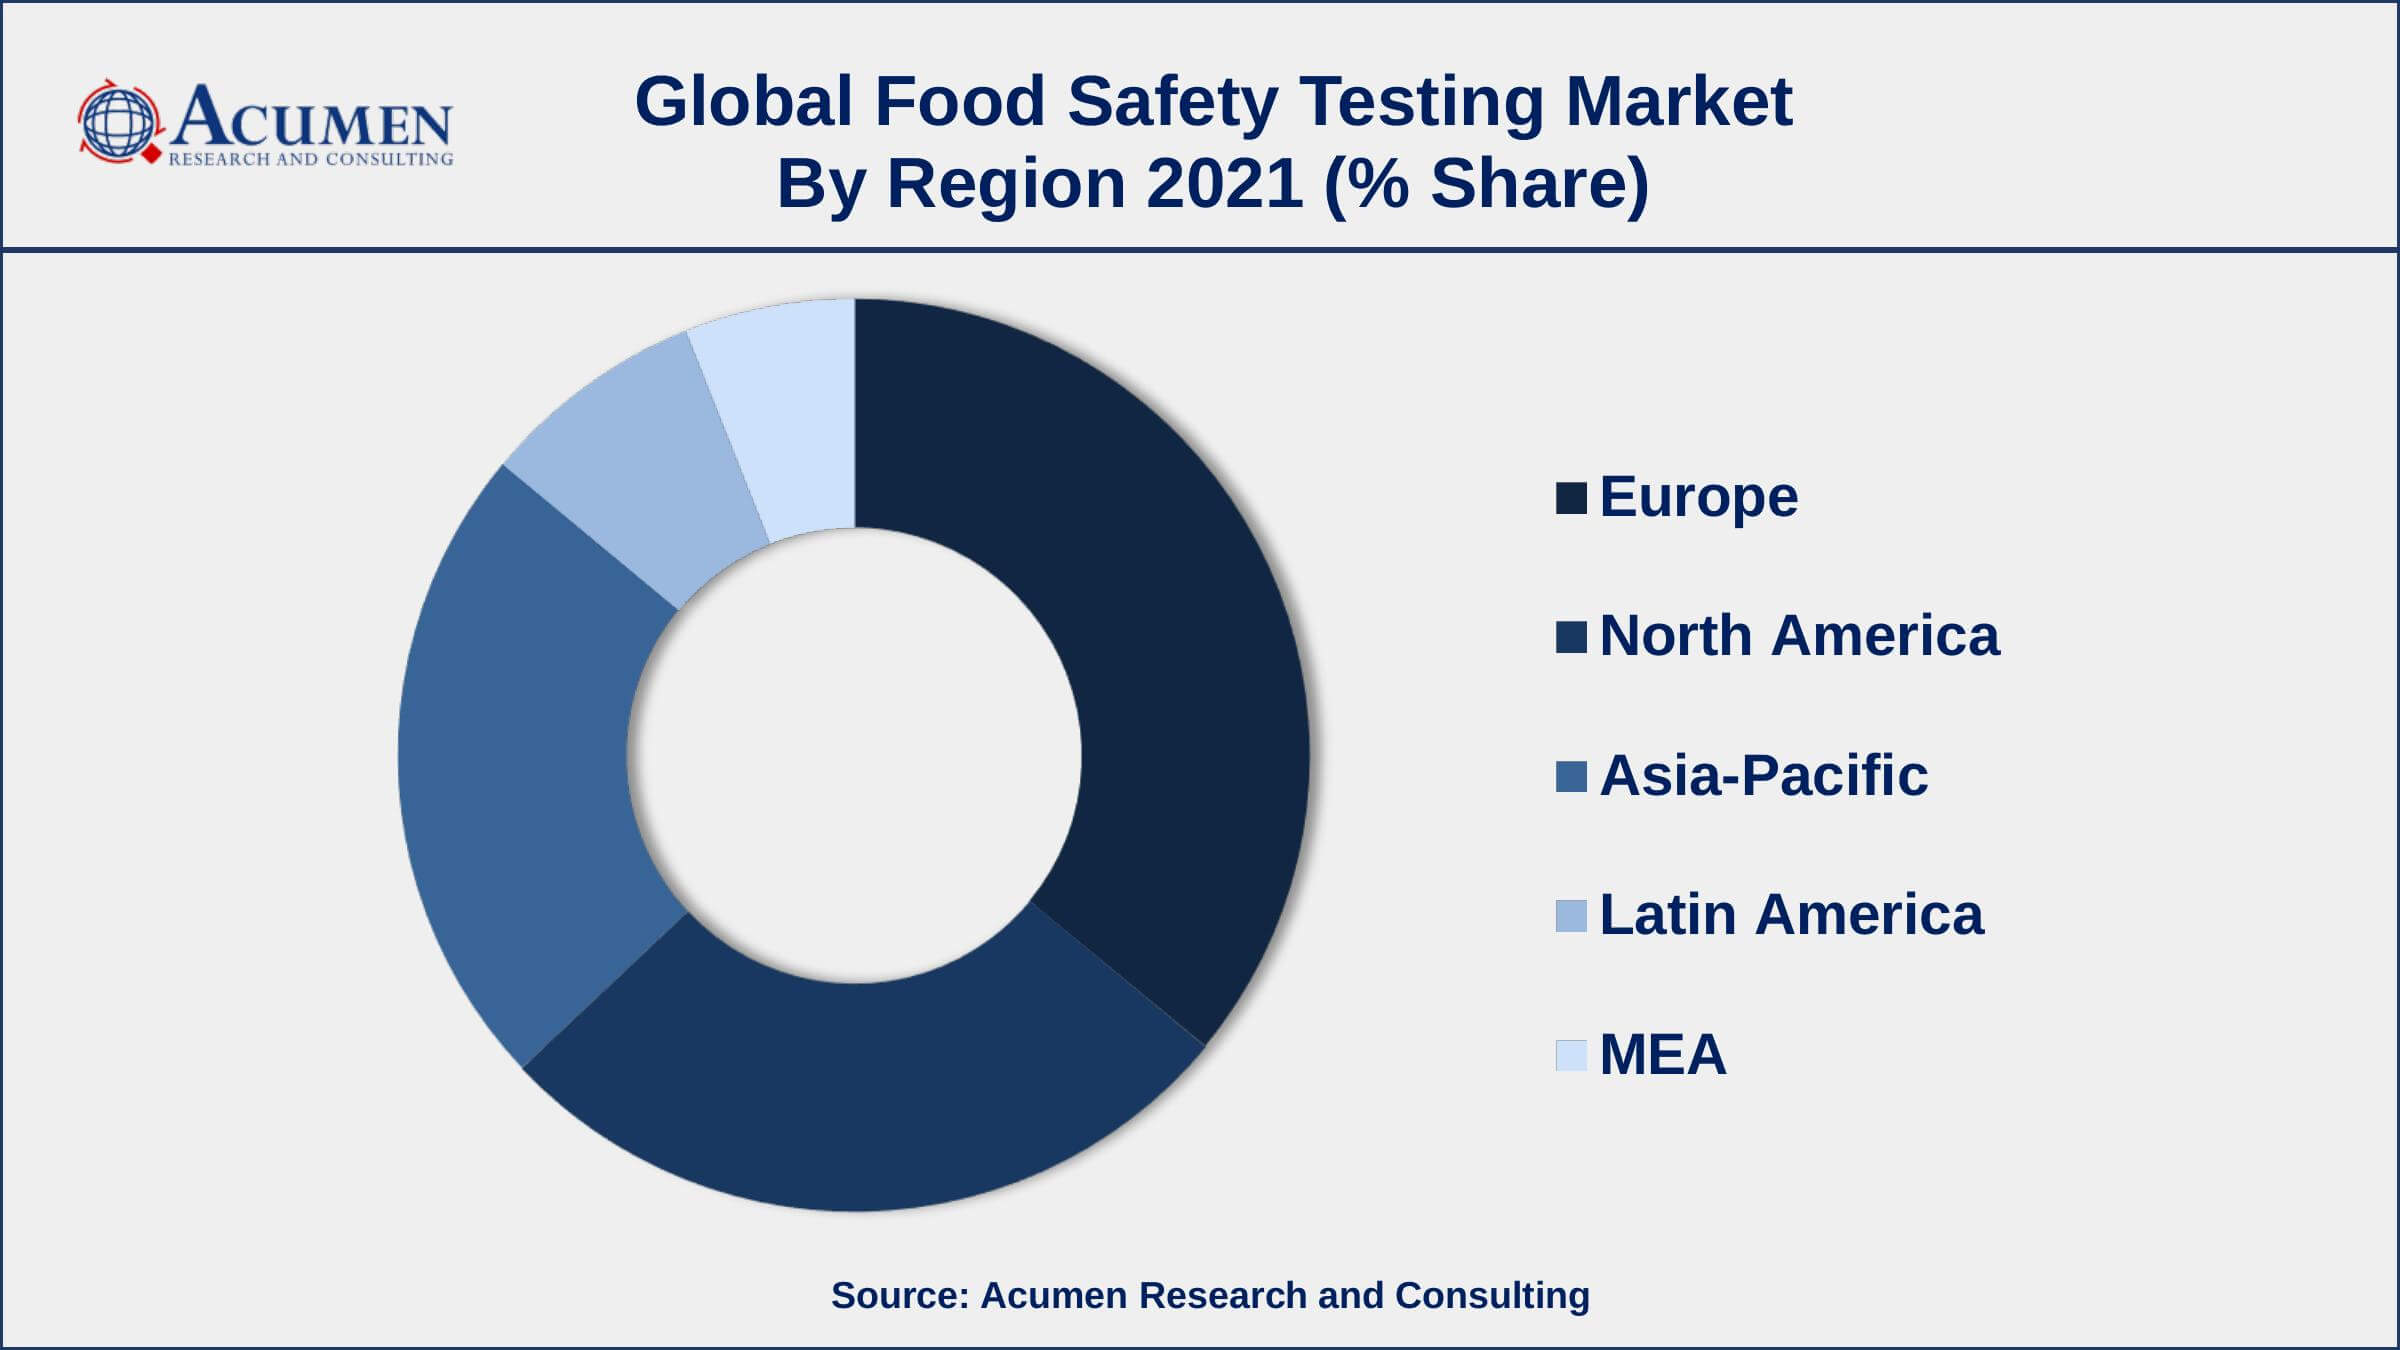 Implementation of rigorous food safety standards, drives the food safety testing market size